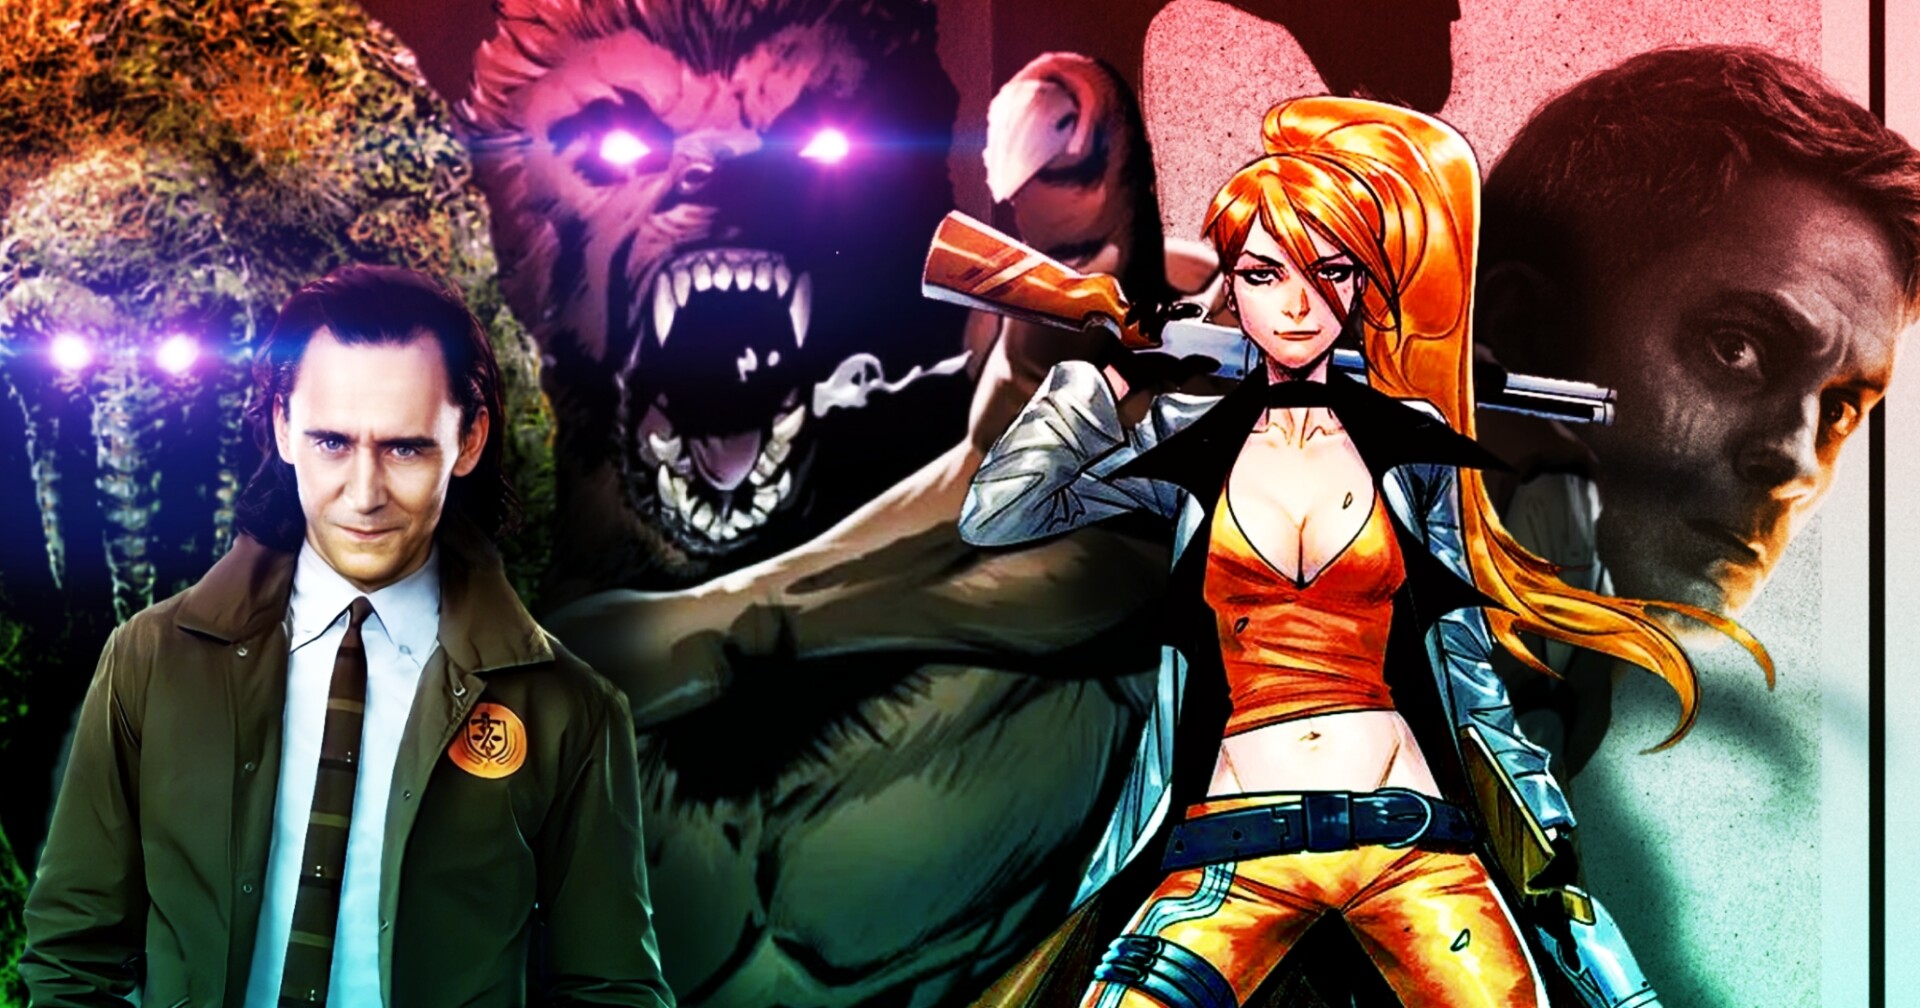 Marvel's Werewolf by Night: Kevin Feige Teases 'Scary' New Disney+